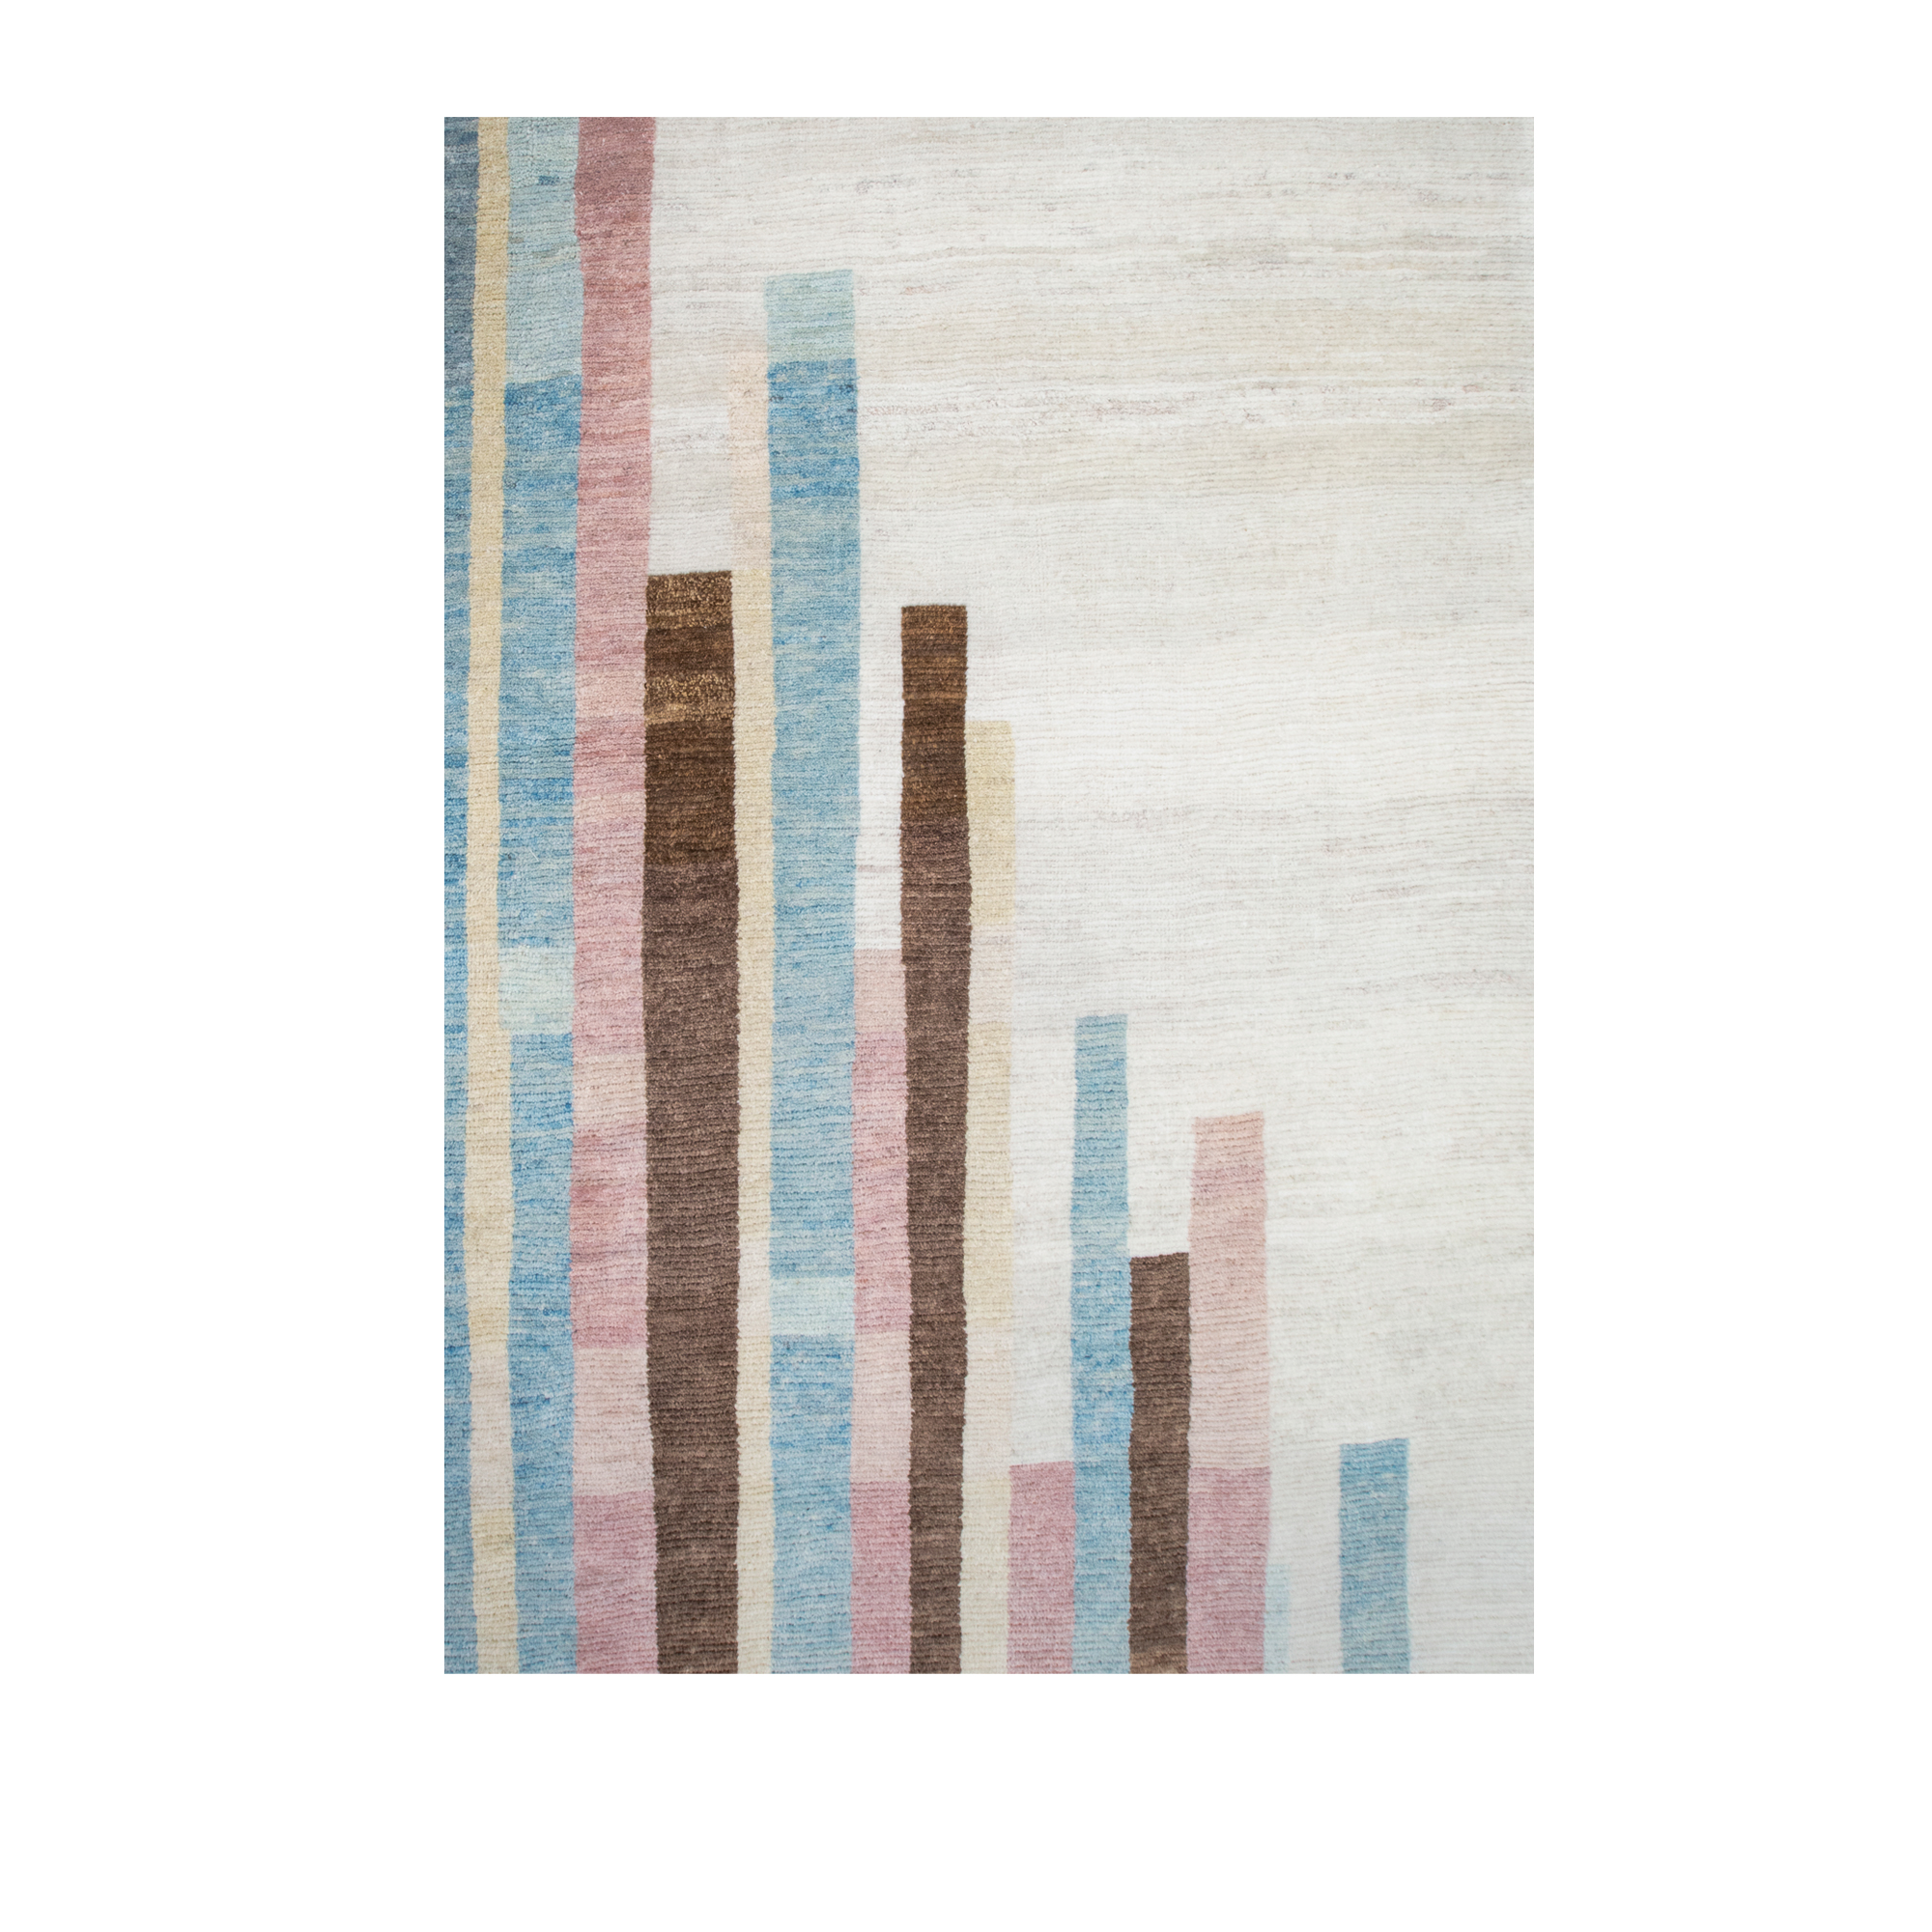 Cityscape rug is a hand-knotted, modern rug comprised of the finest quality wools and natural dyes.